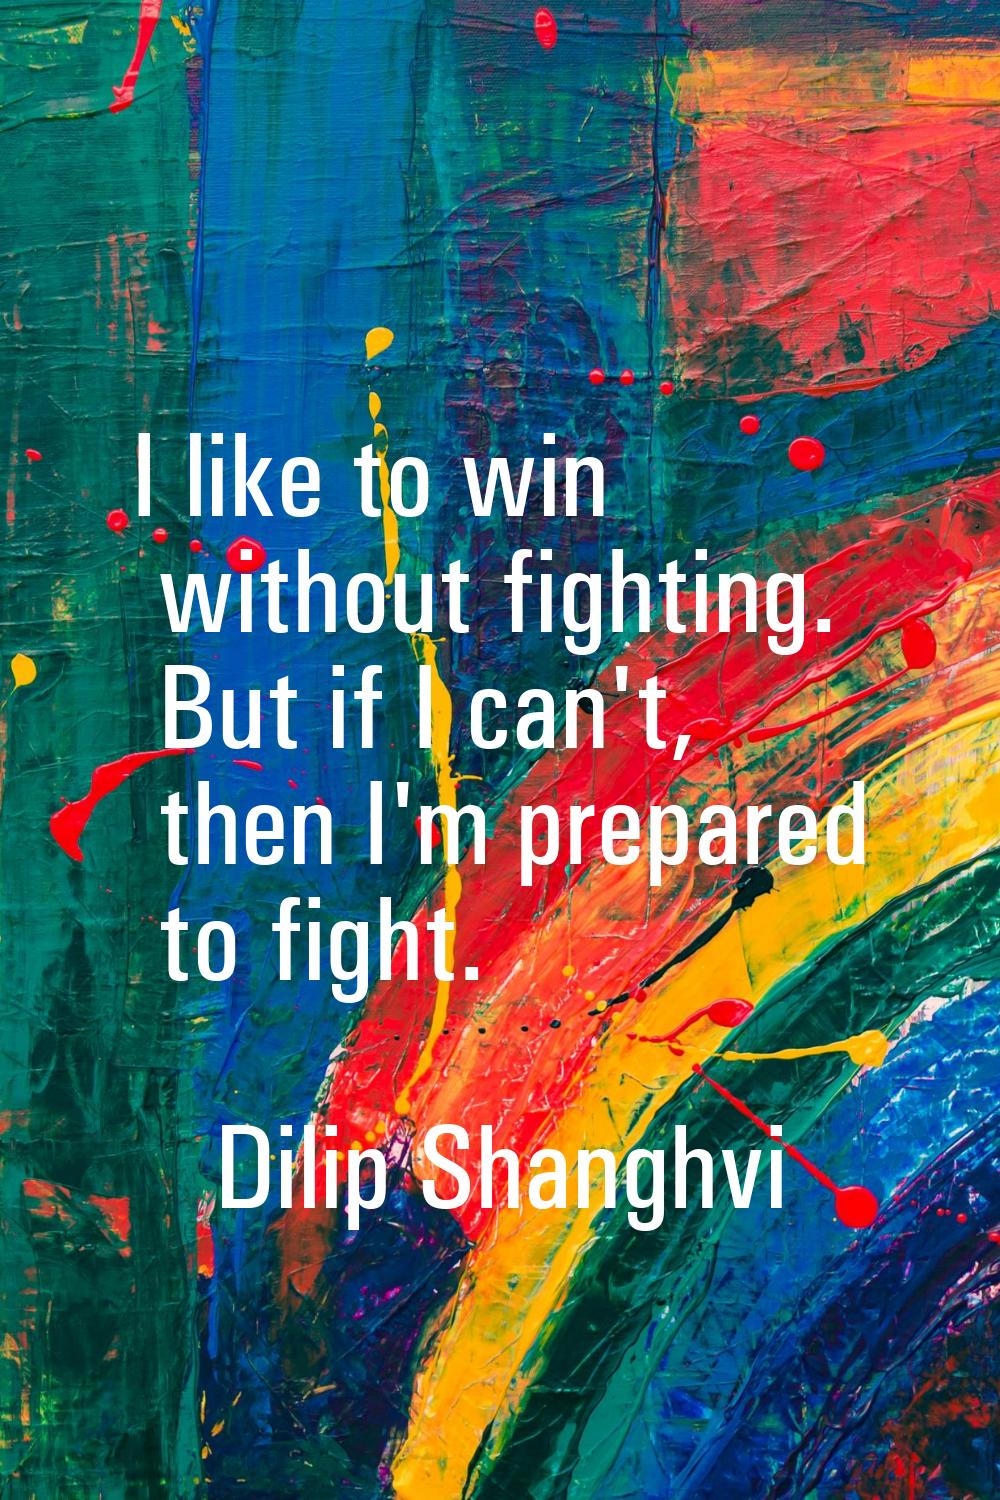 I like to win without fighting. But if I can't, then I'm prepared to fight.